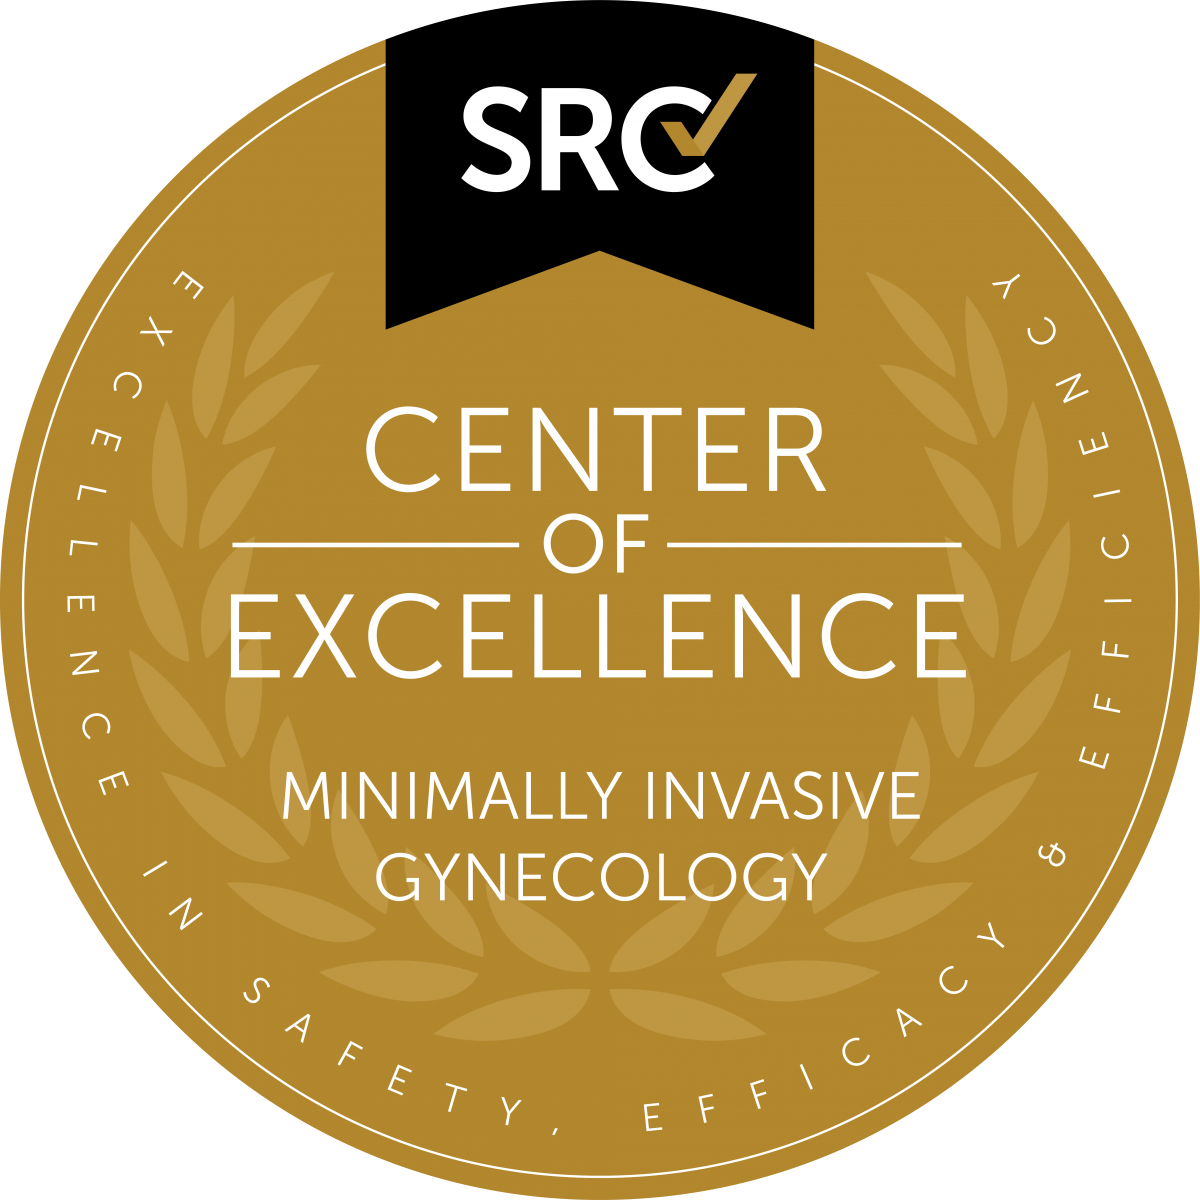 Center of excellence minimally invasive